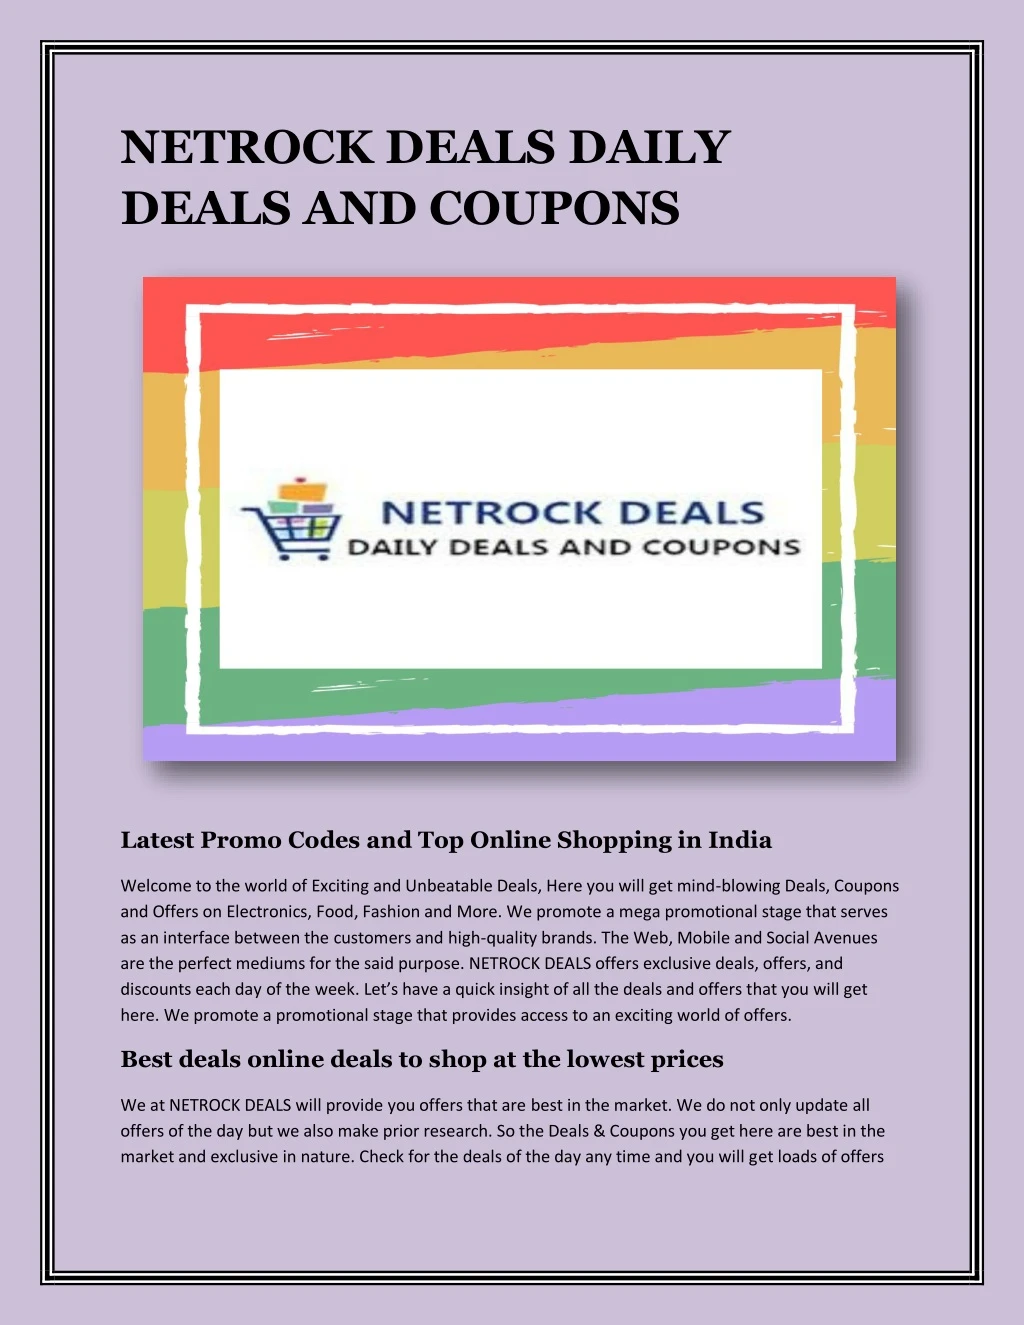 netrock deals daily deals and coupons